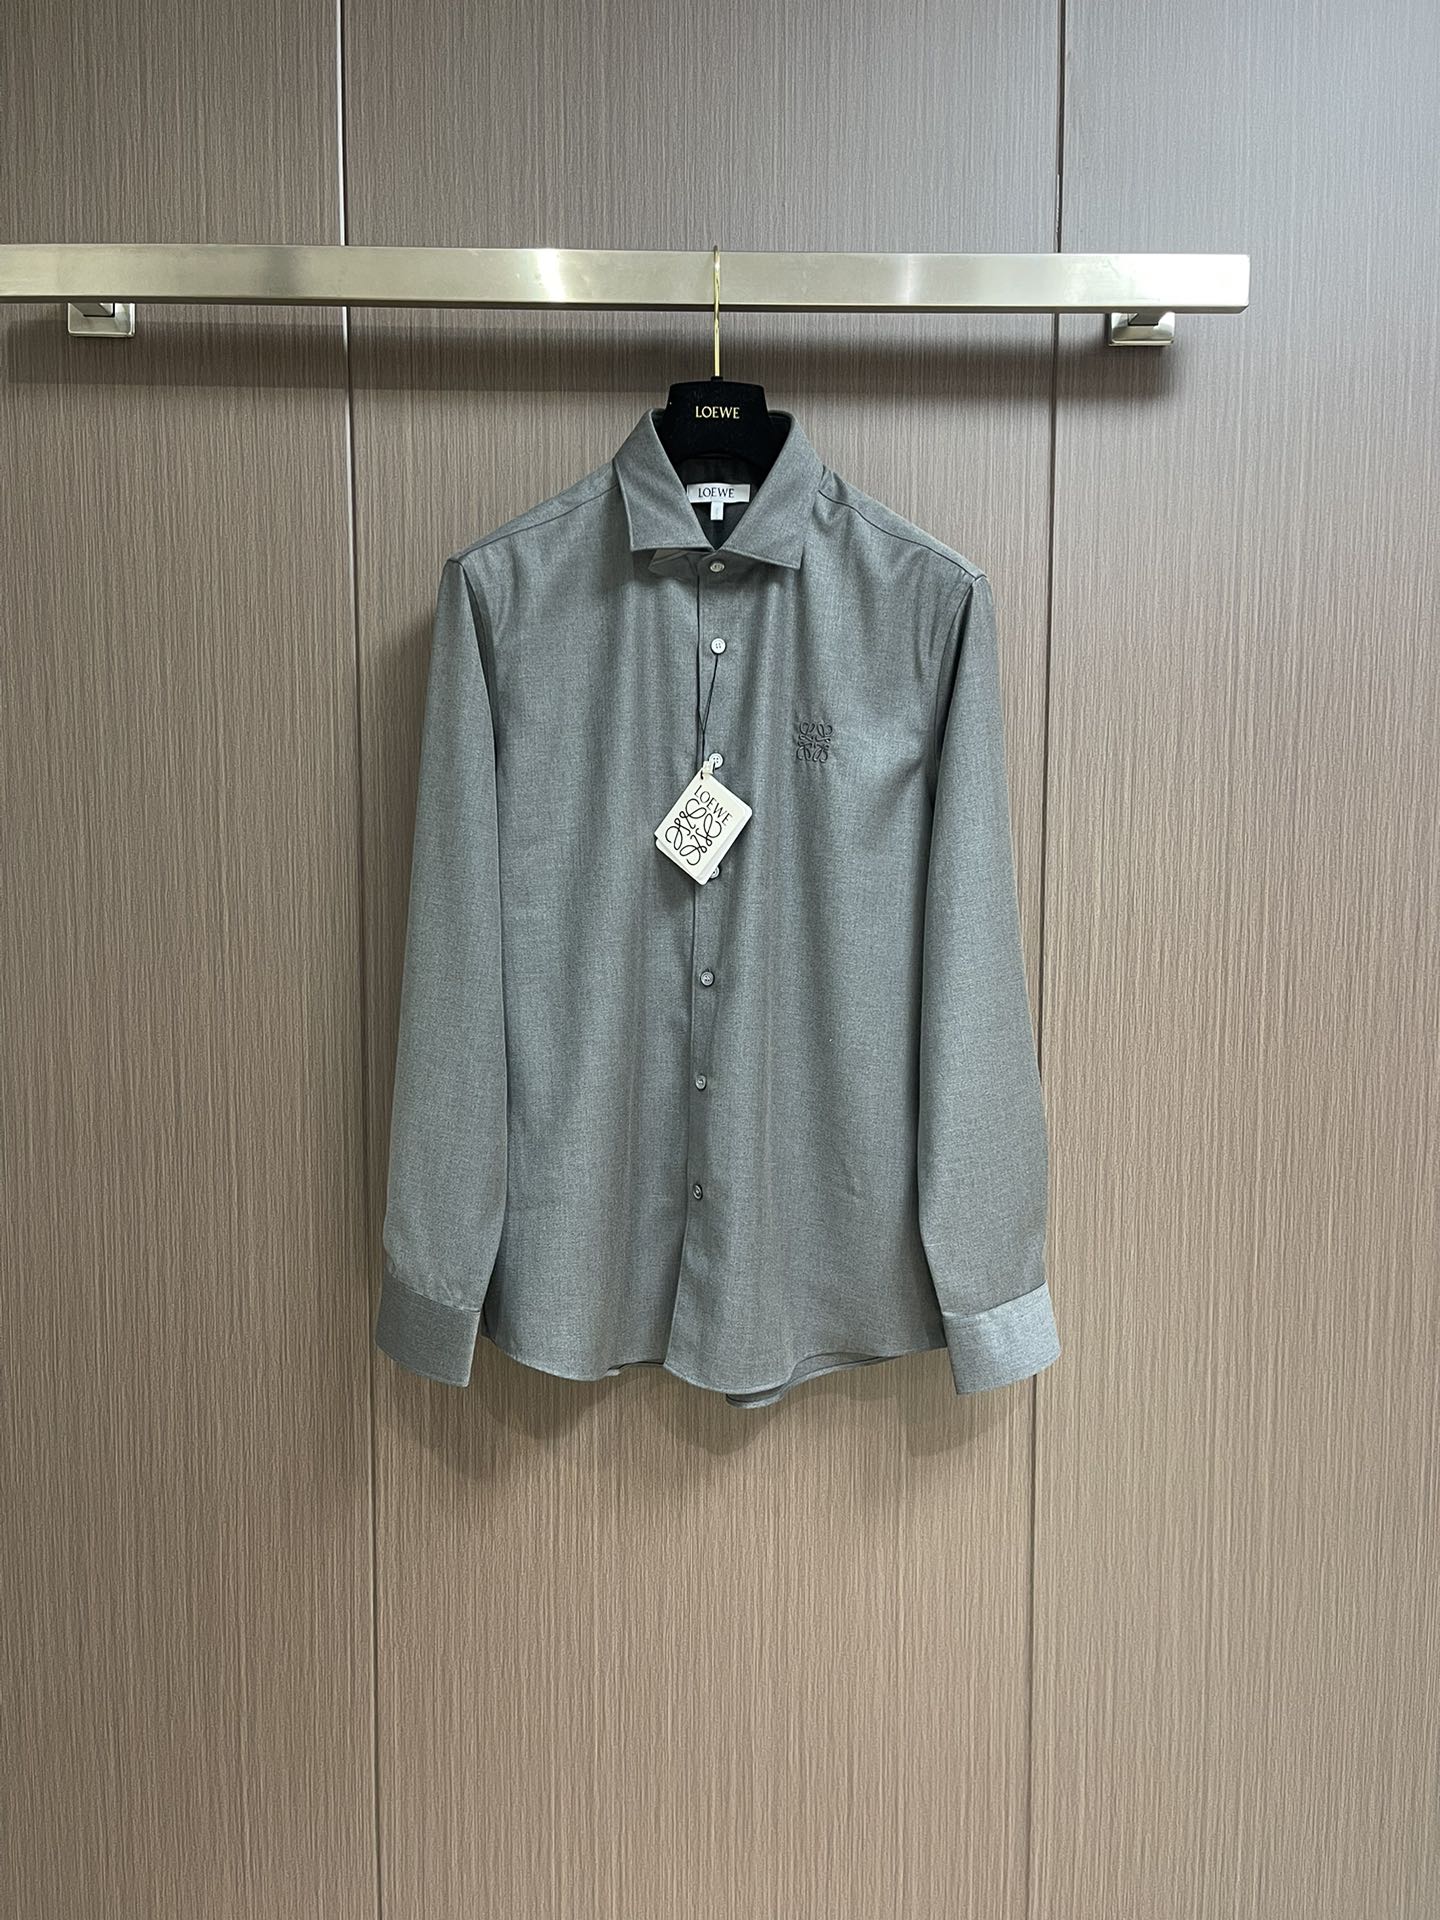 Loewe Clothing Shirts & Blouses Embroidery Spring Collection Long Sleeve